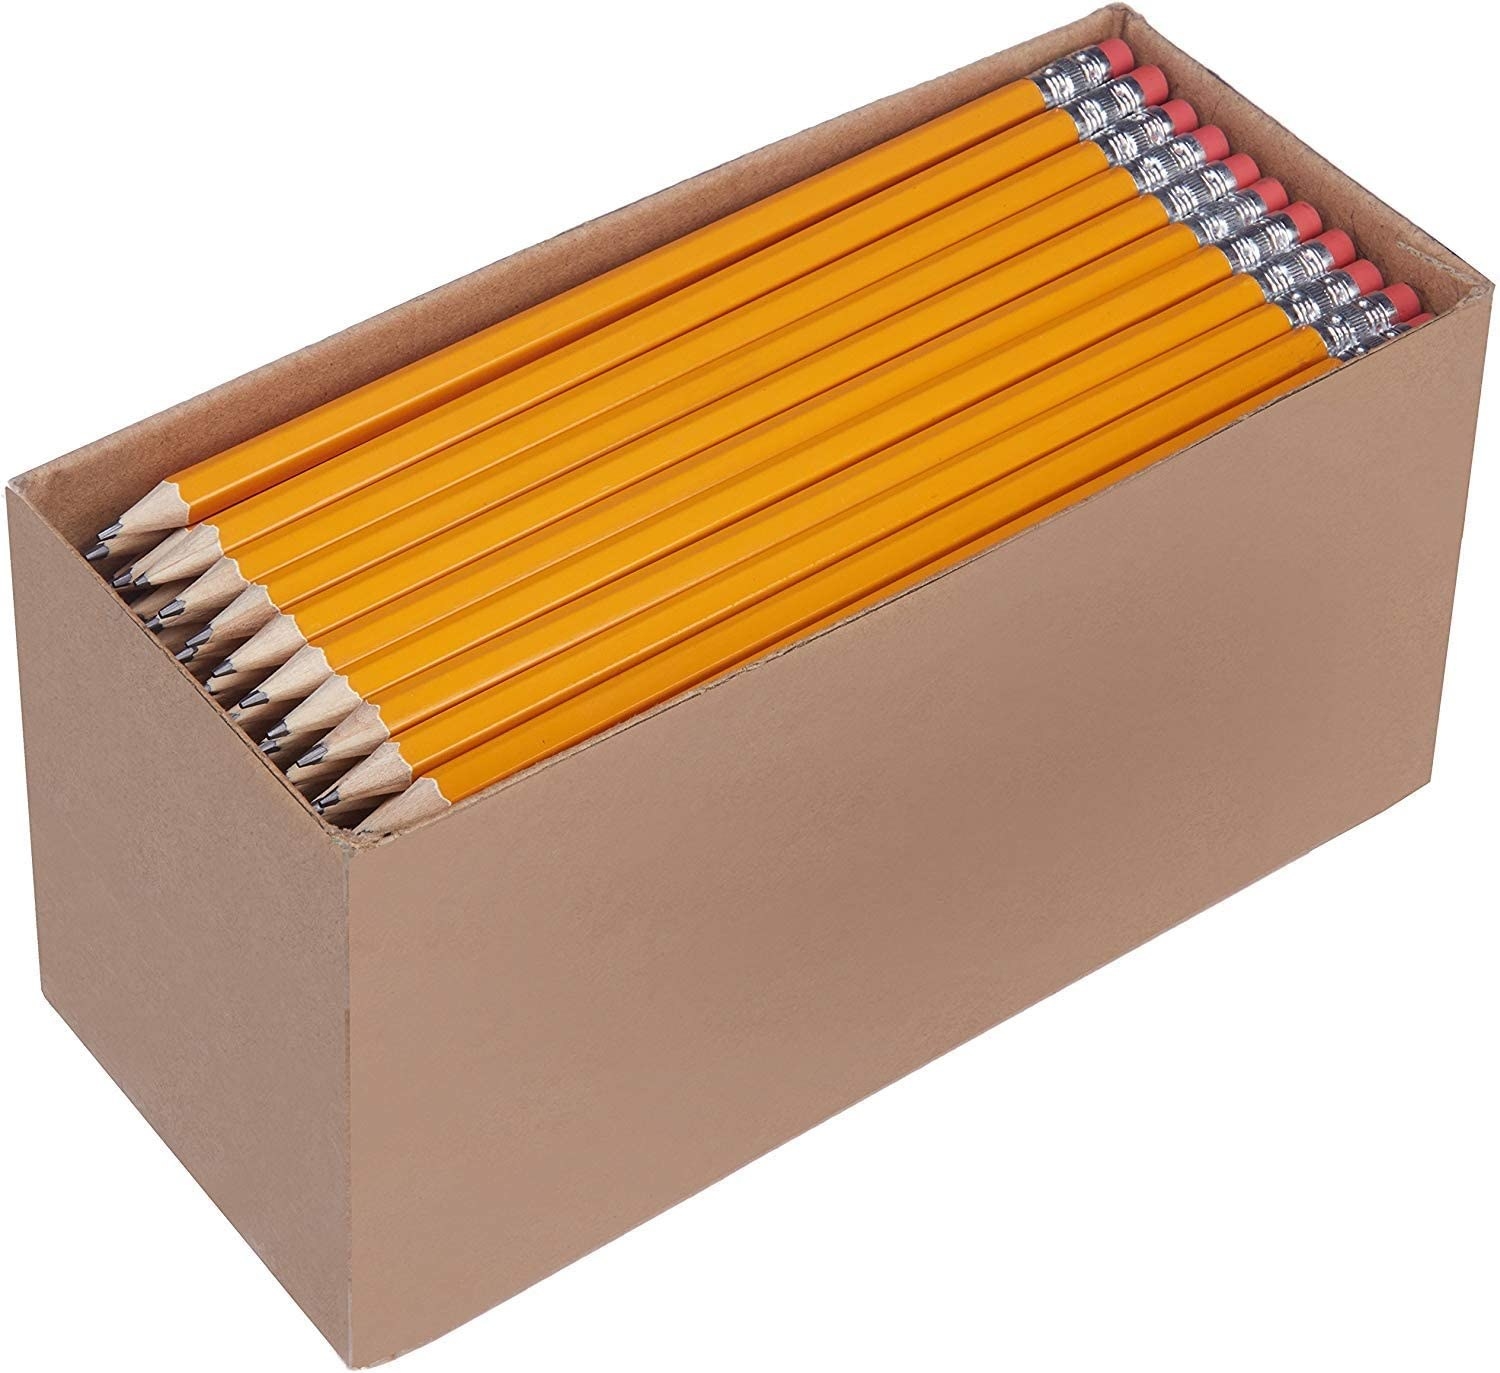 A brown box containing150 pencils